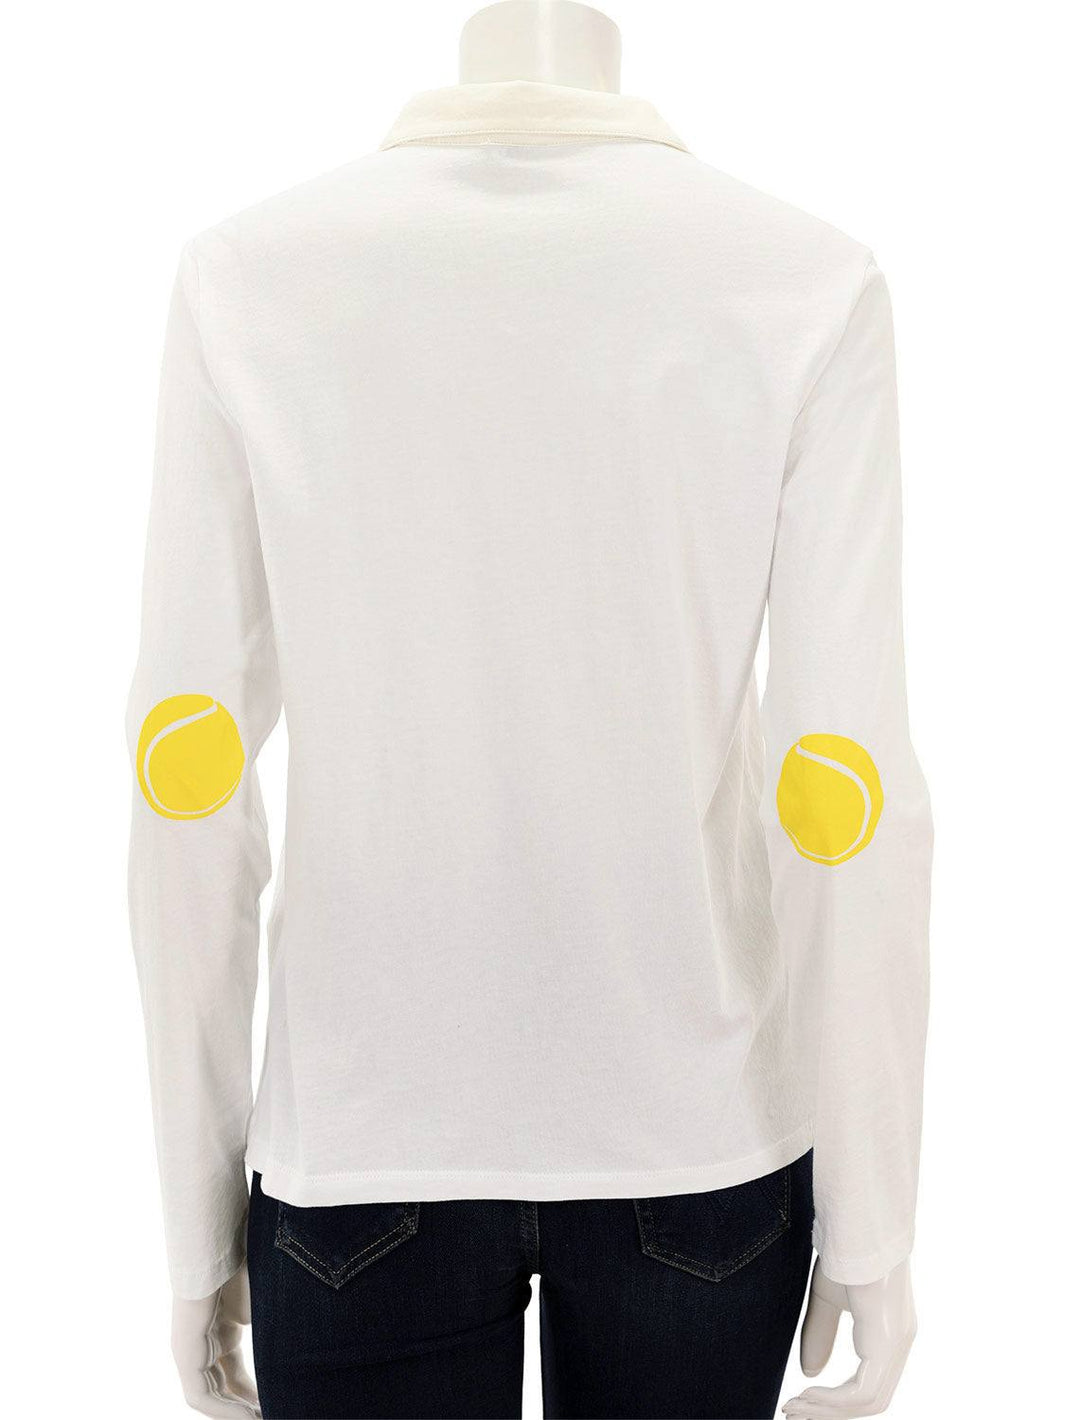 Back view of KULE's the tennis elbow polo in white.